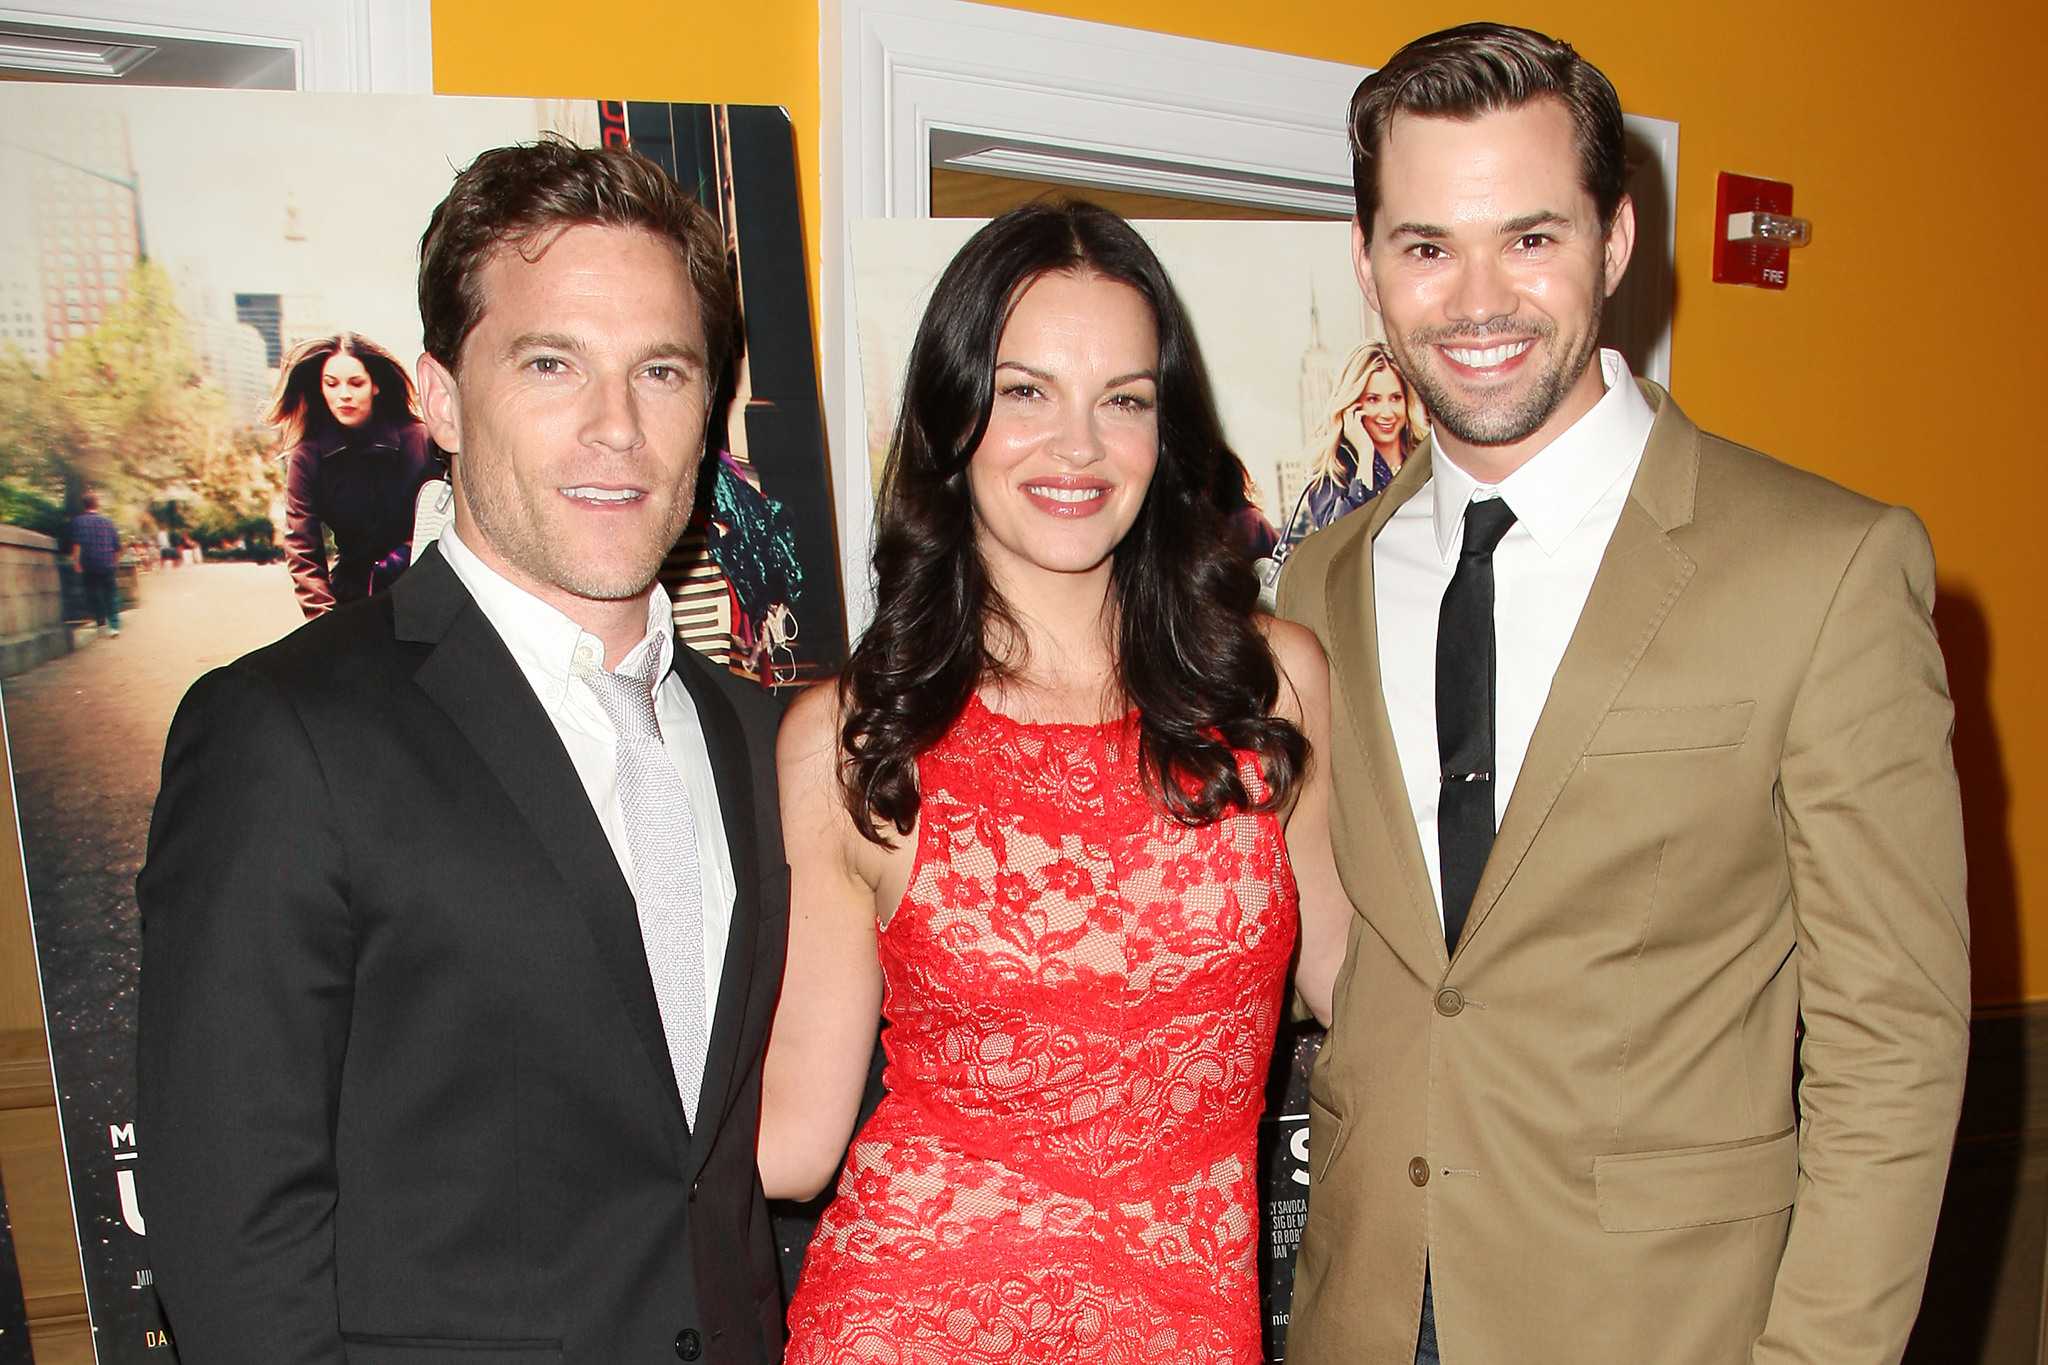 Tammy Blanchard, Mike Doyle and Andrew Rannells at event of Union Square (2011)